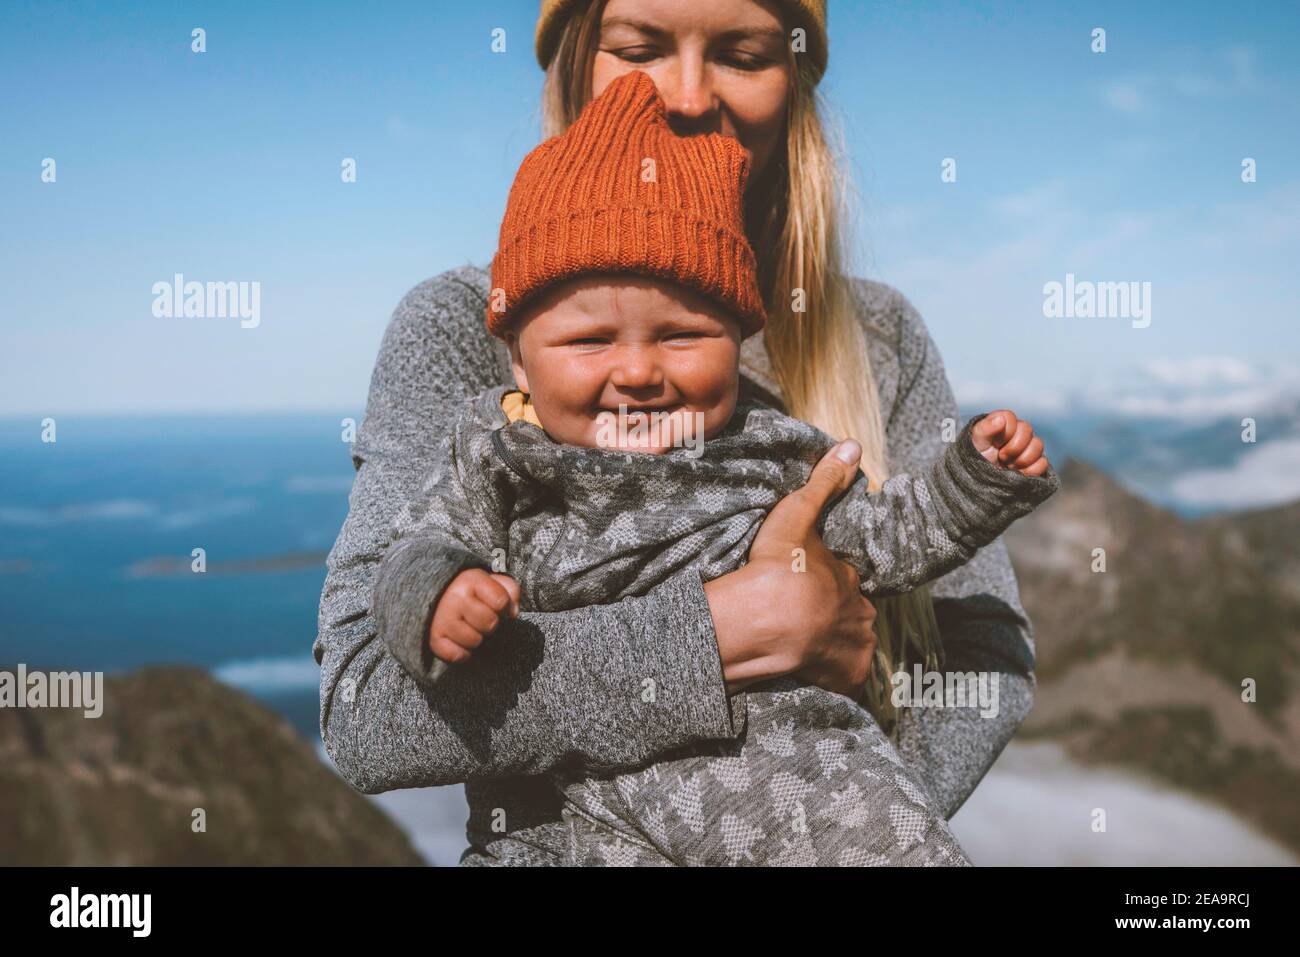 Baby with mother family travel lifestyle vacation woman hiking with infant child happy emotions healthy lifestyle kid smiling portrait outdoor Stock Photo